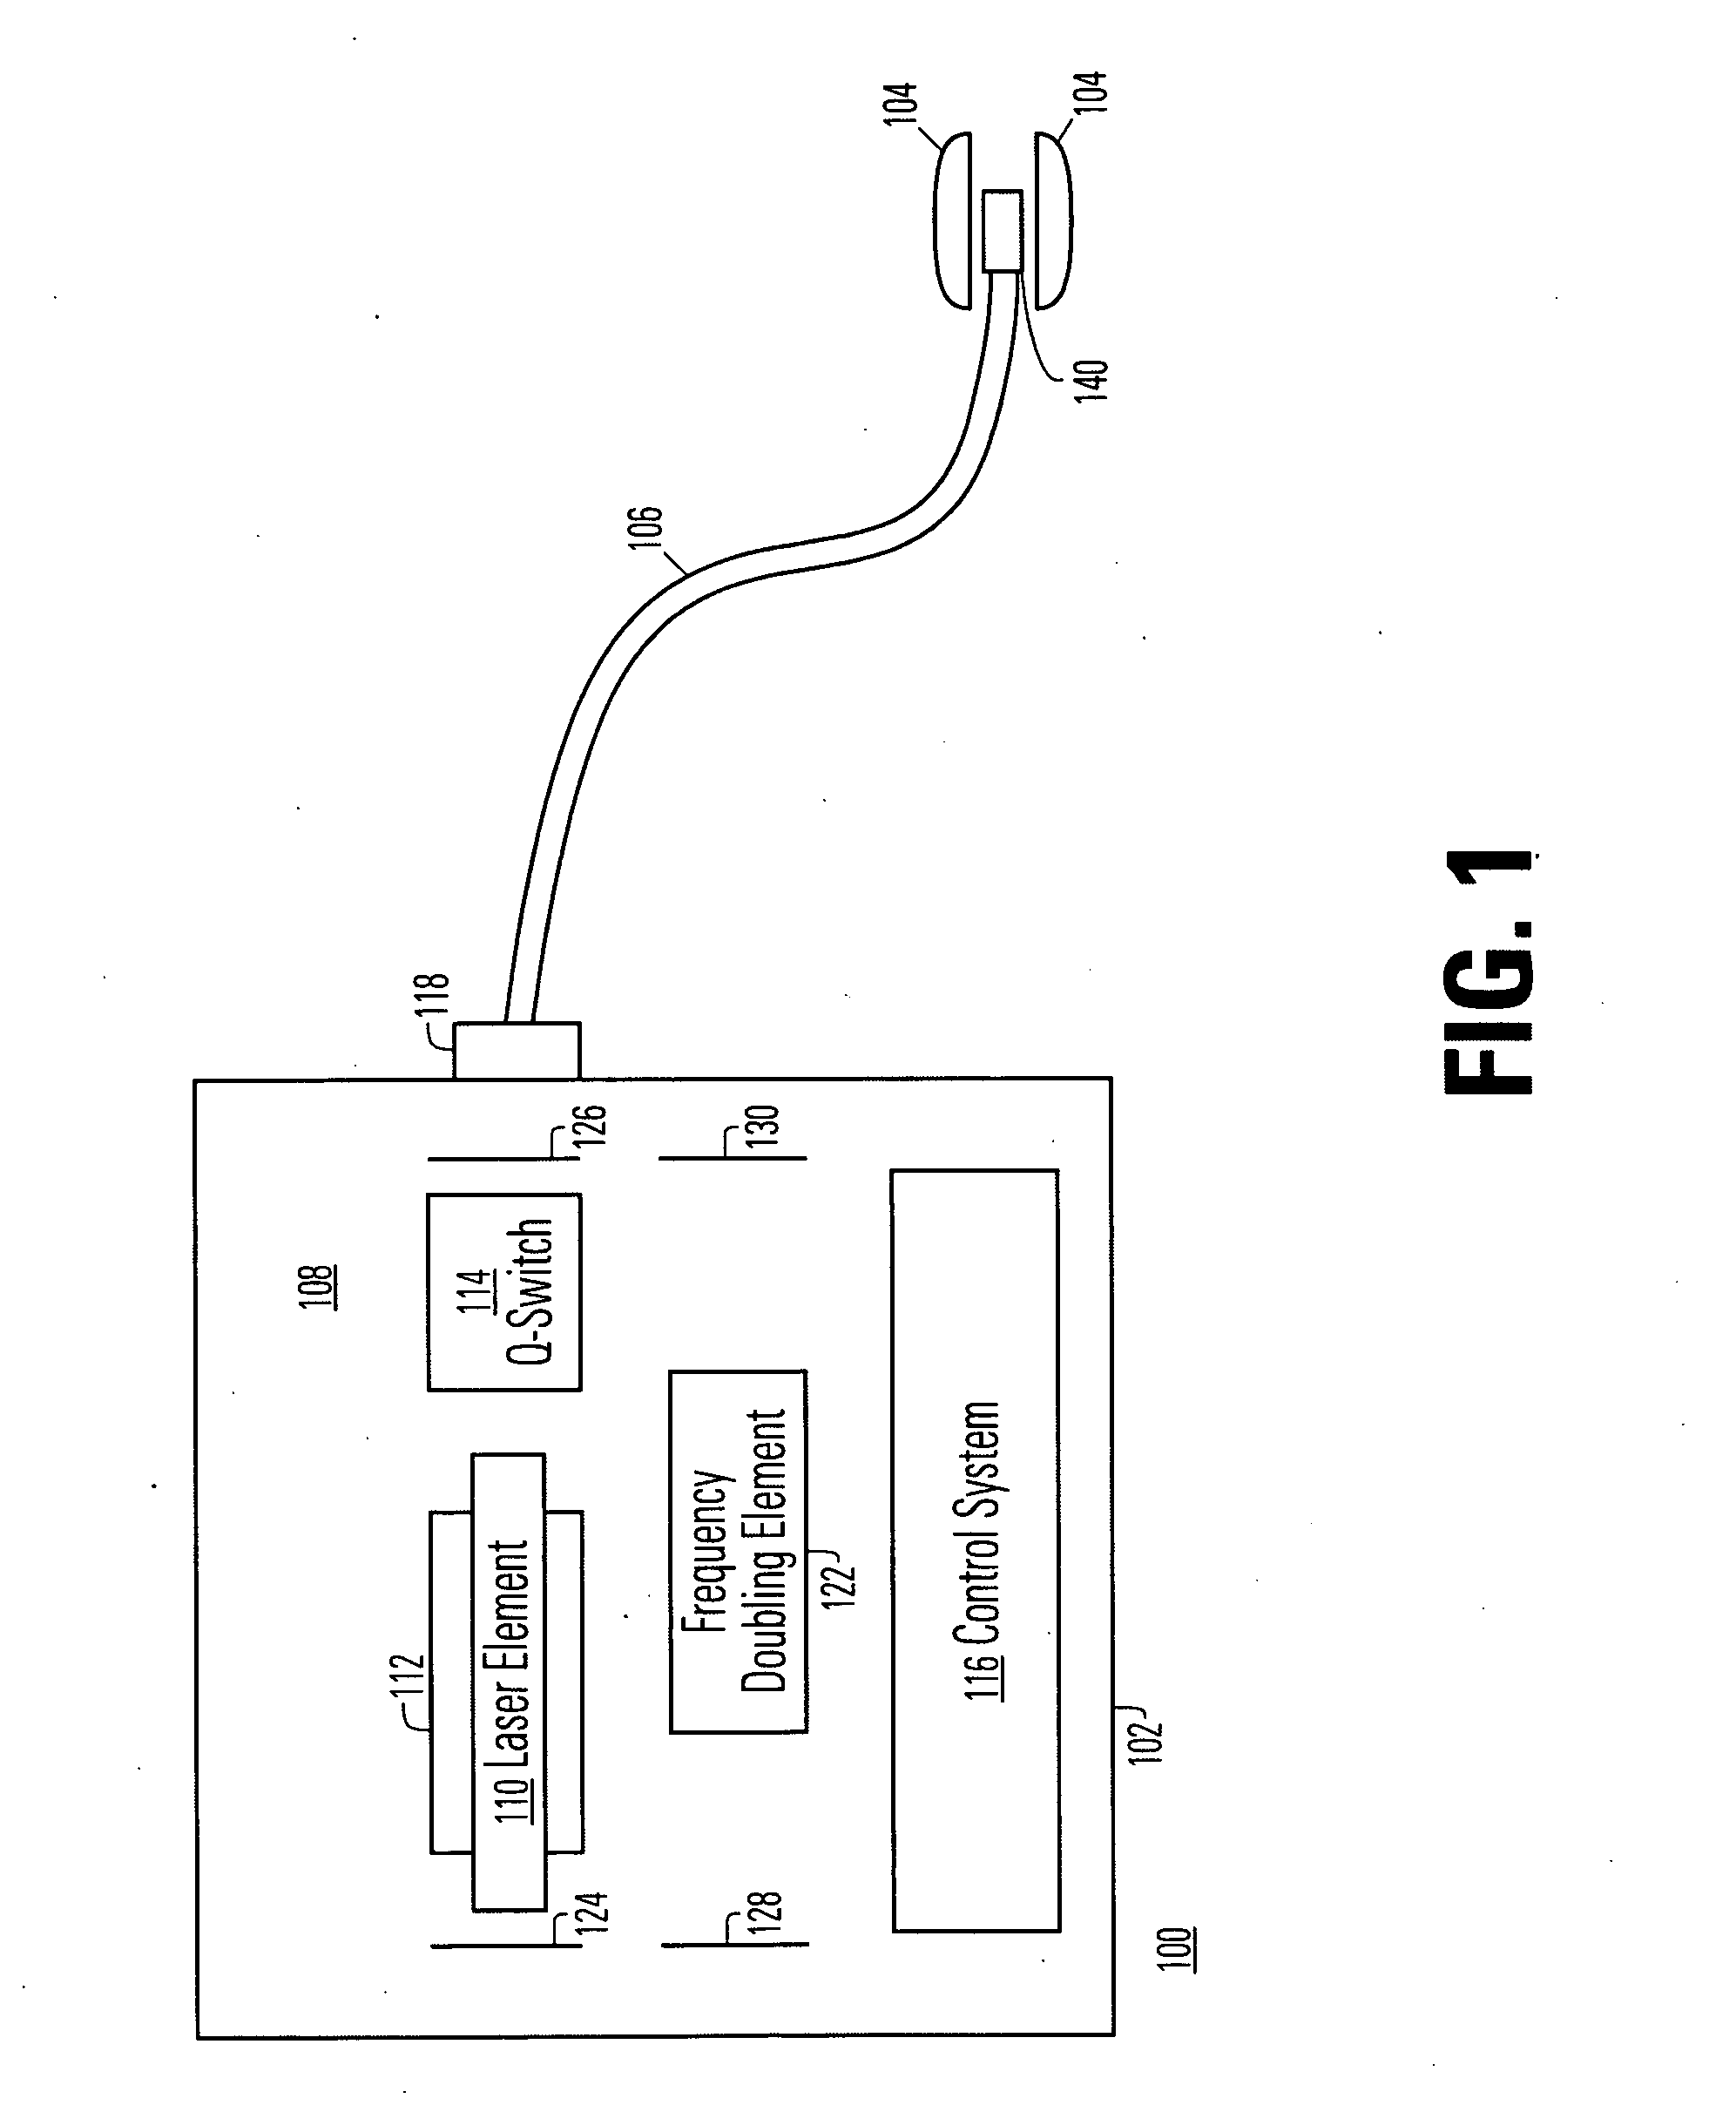 Method and system for photoselective vaporization of the prostate, and other tissue